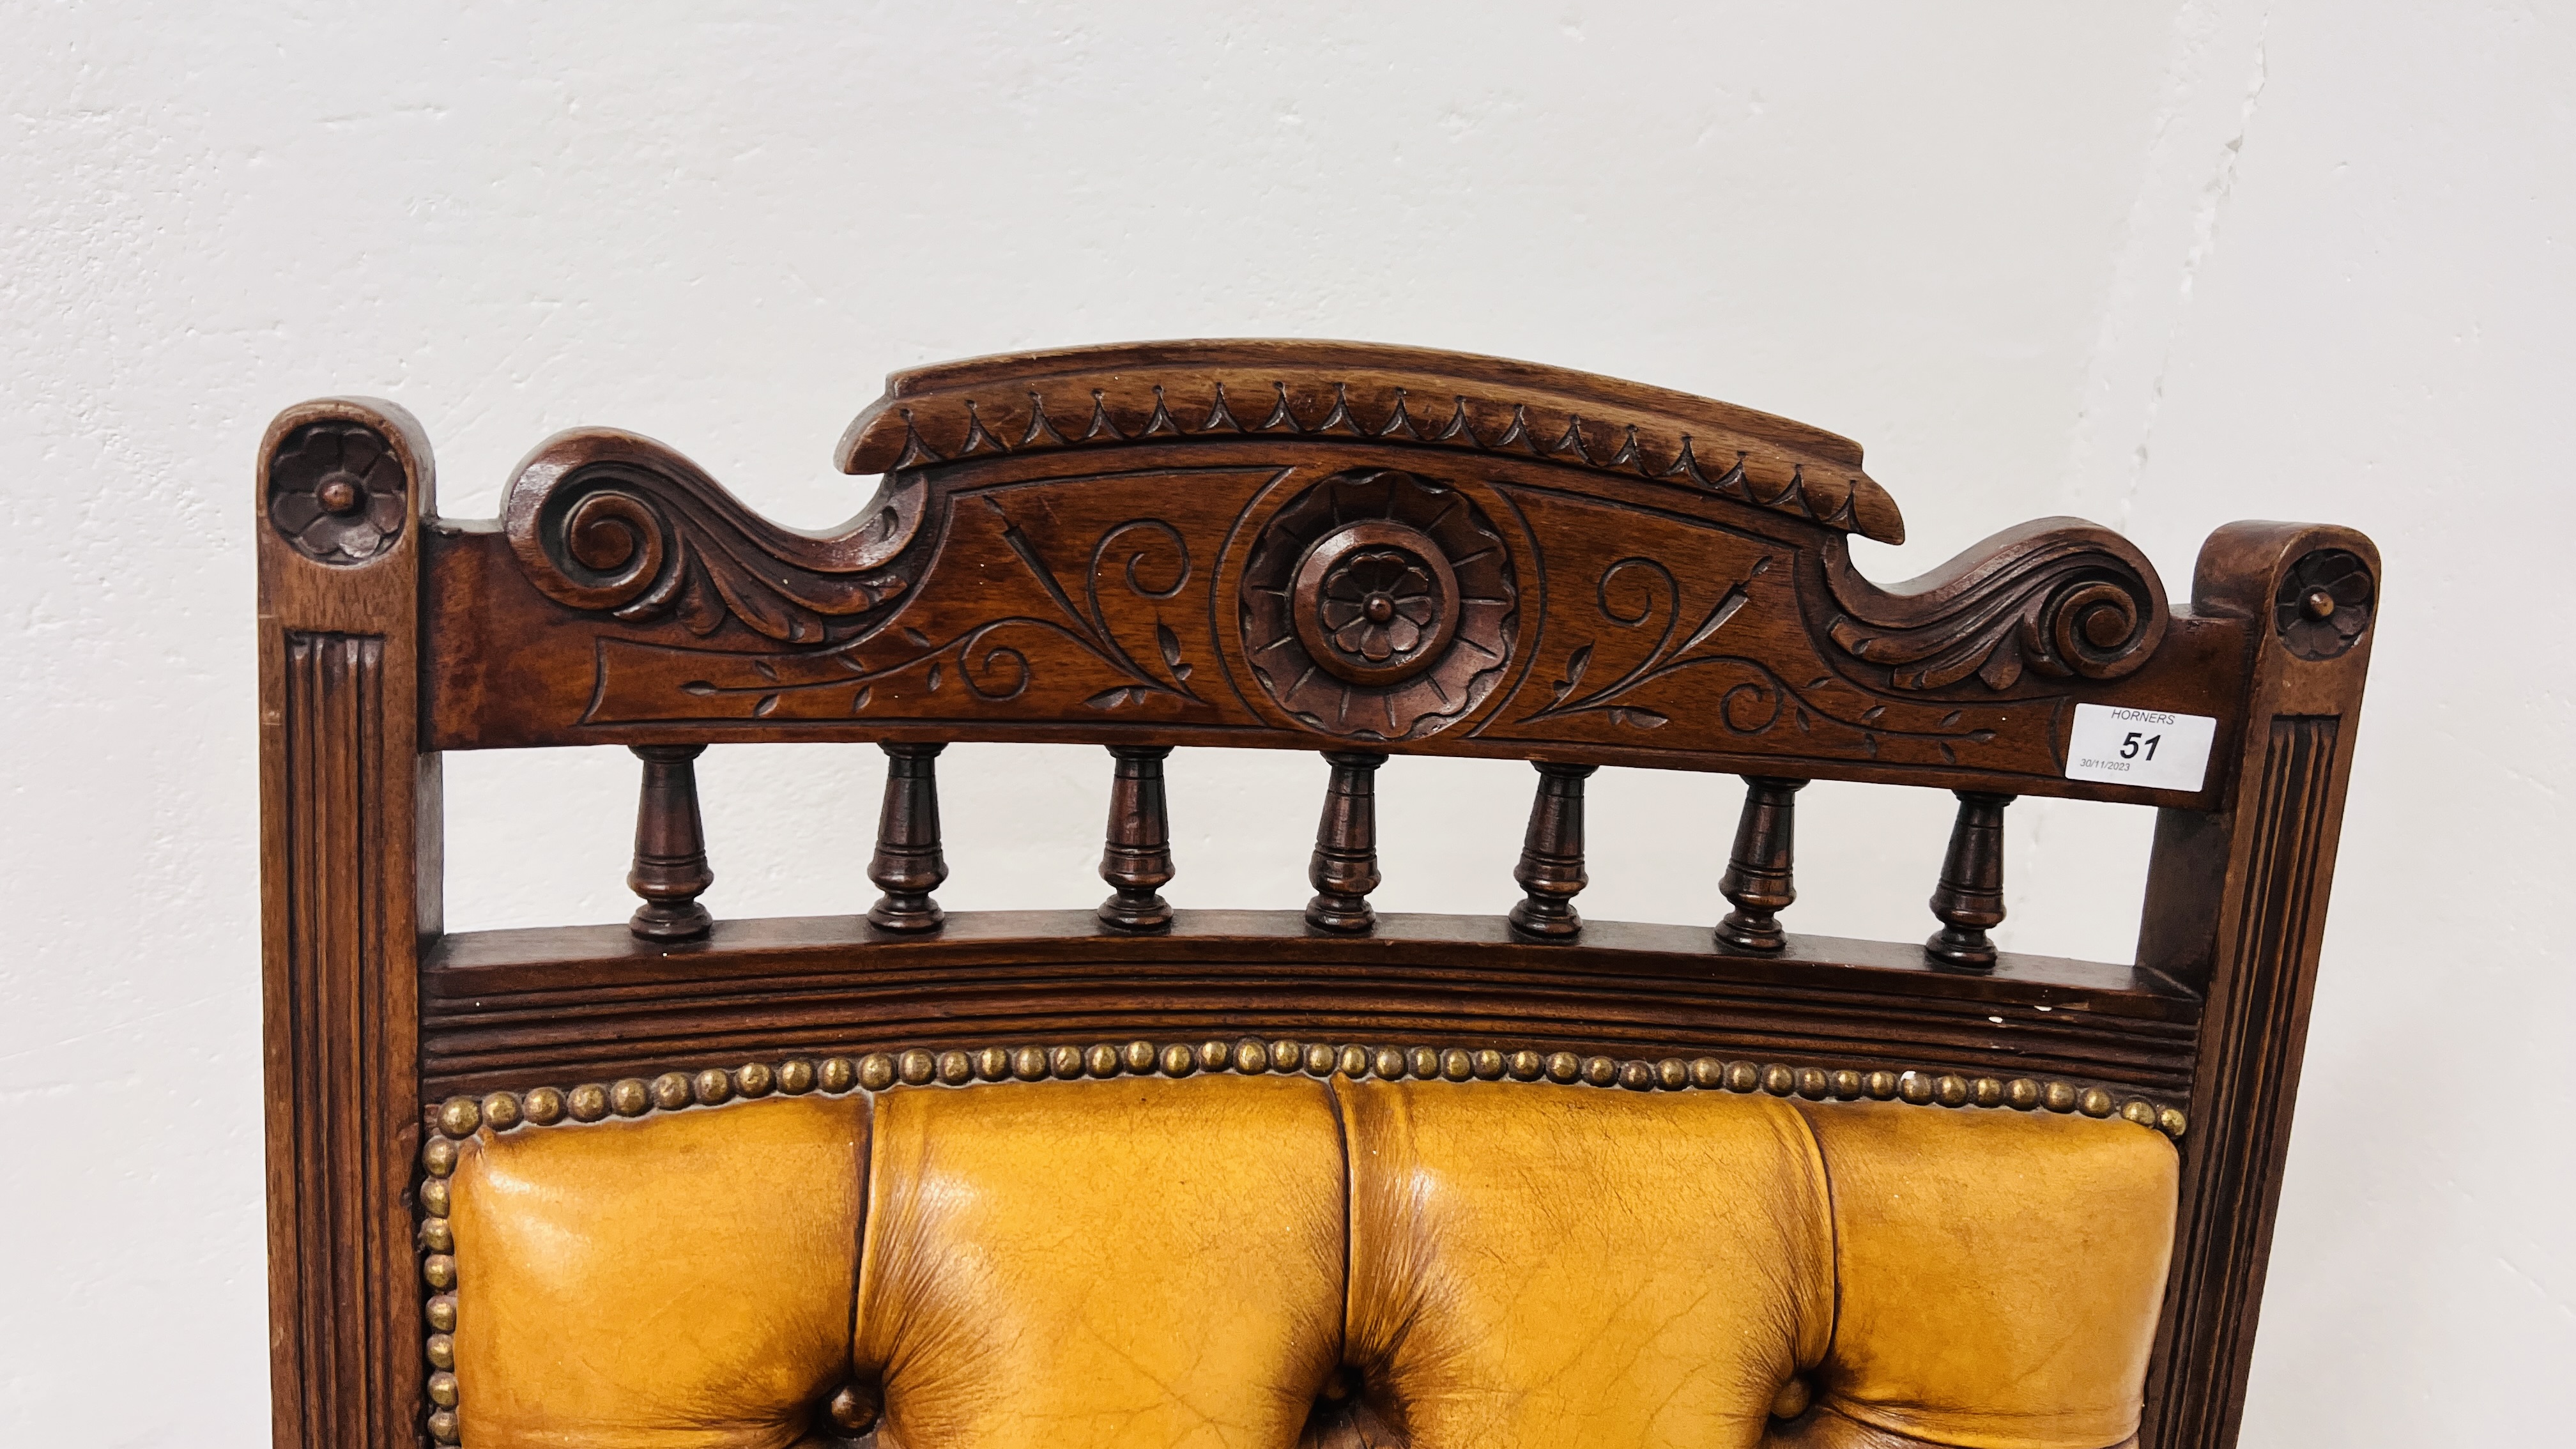 ANTIQUE EDWARDIAN MAHOGANY LOW CHAIR UPHOLSTERED IN TAN LEATHER - BUTTON BACK. - Image 3 of 12